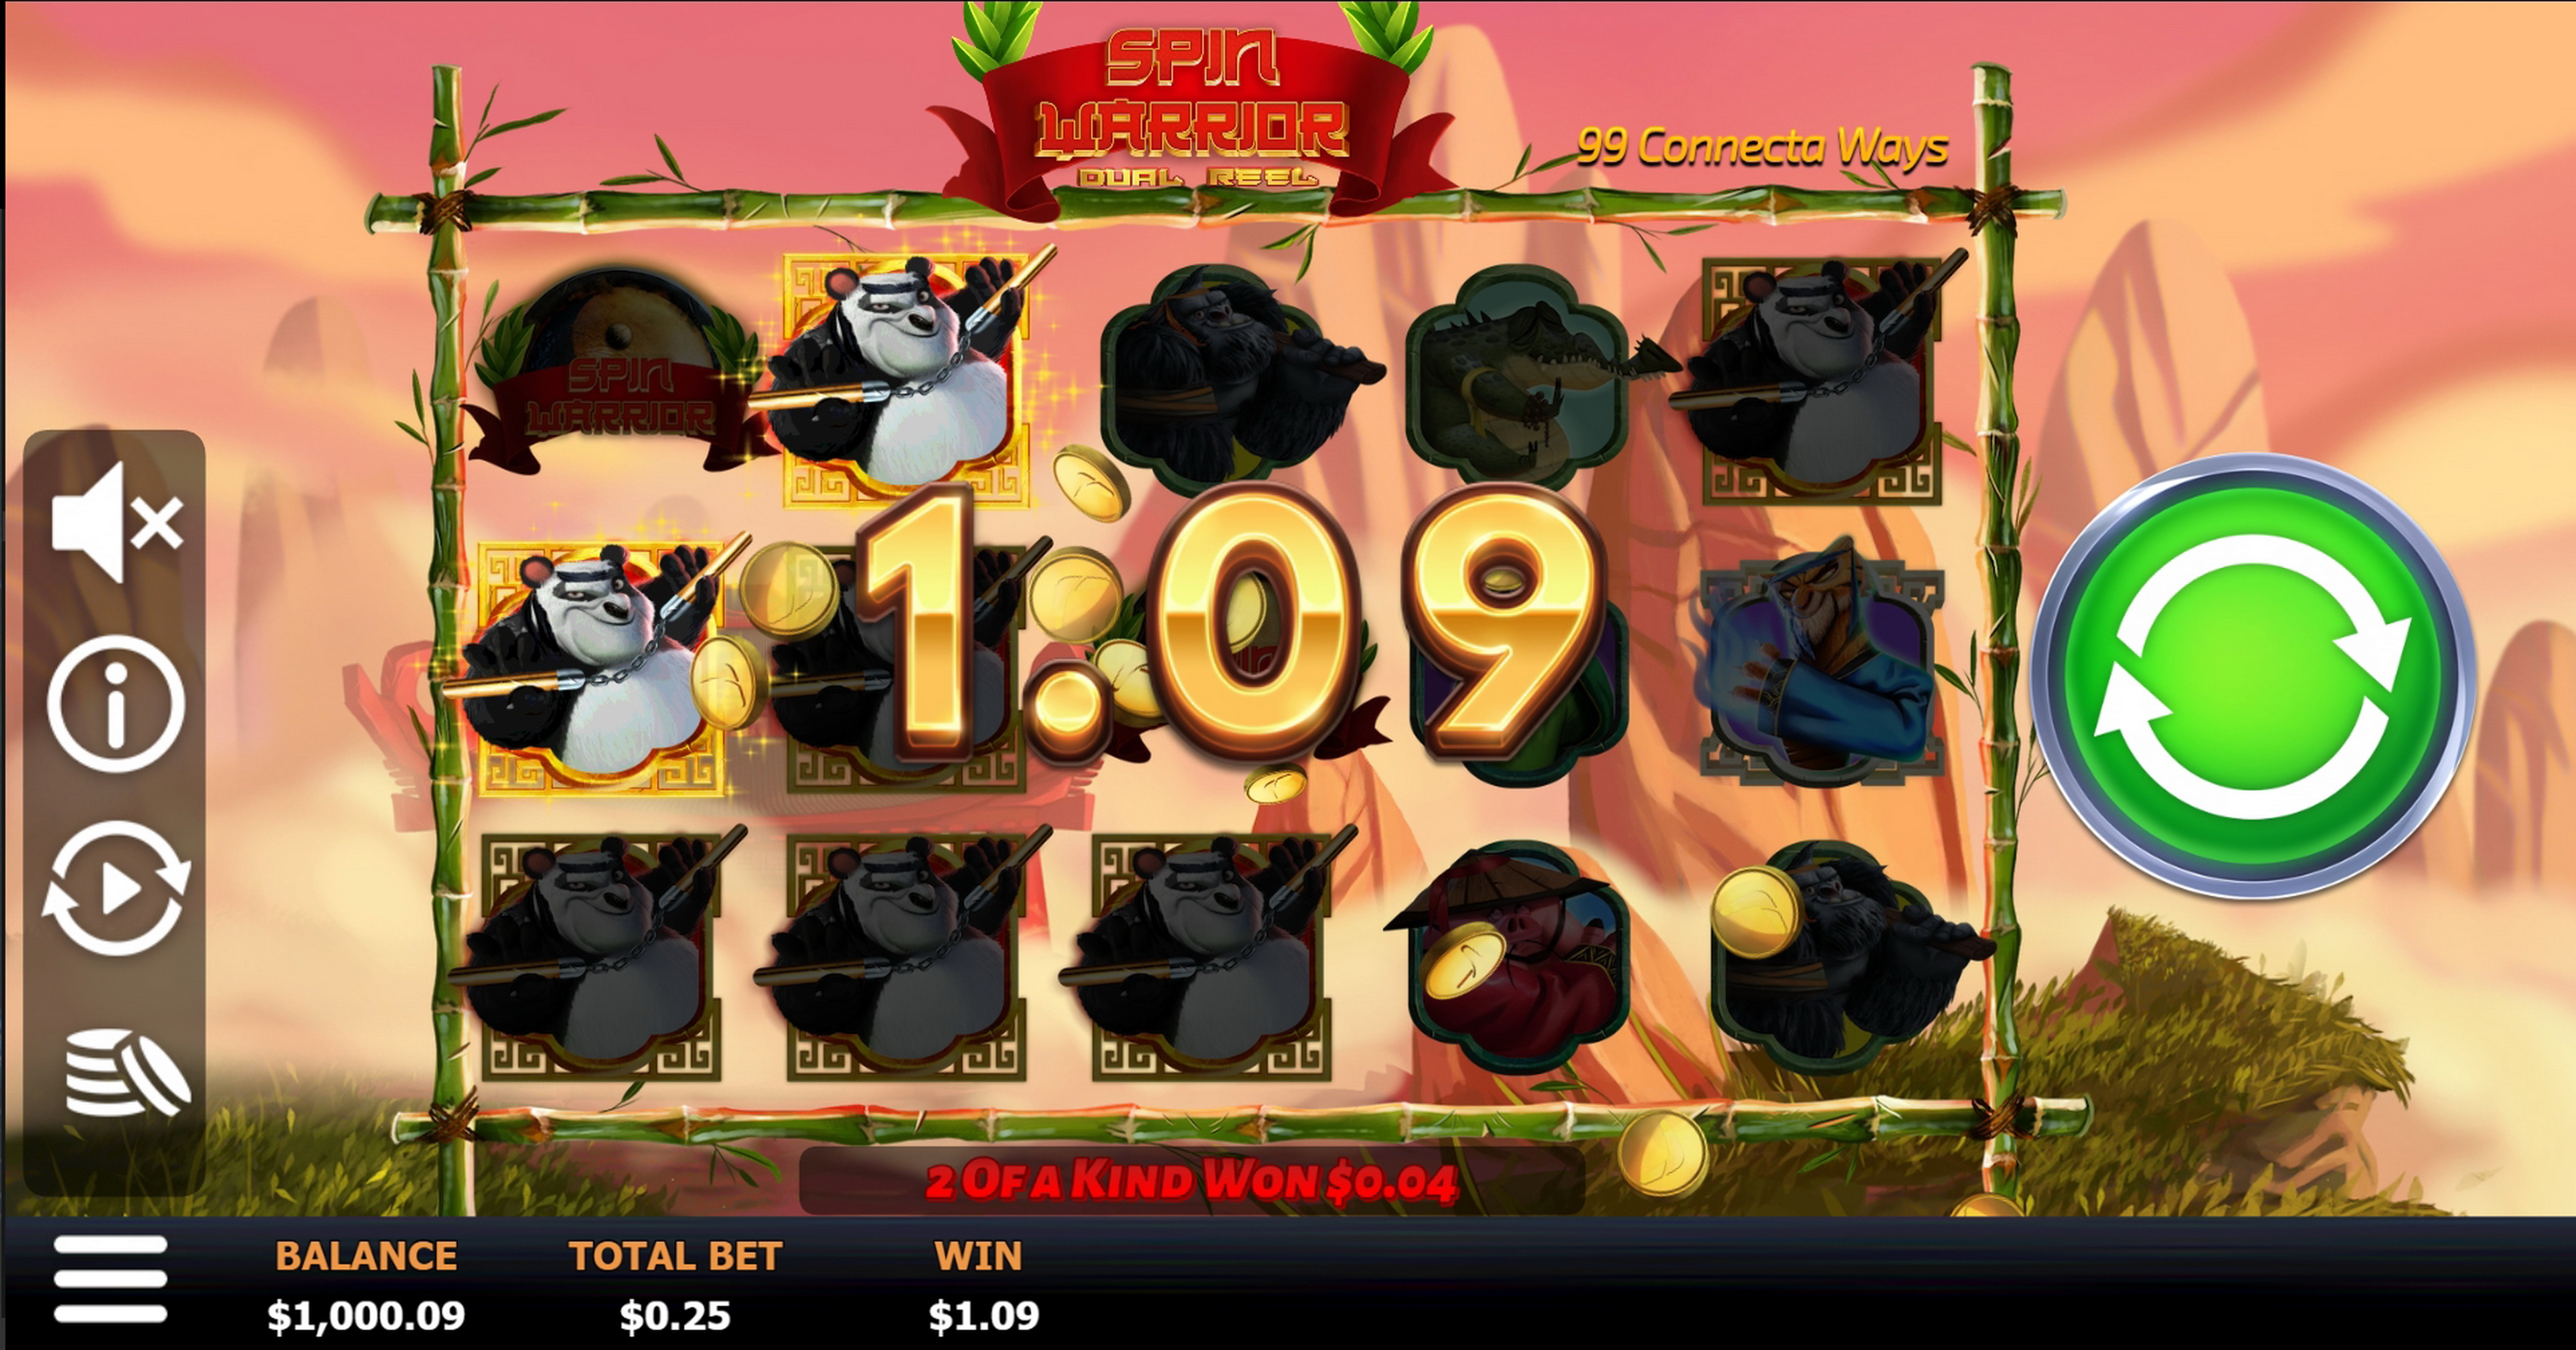 Win Money in Spin Warrior Free Slot Game by Boomerang Studios